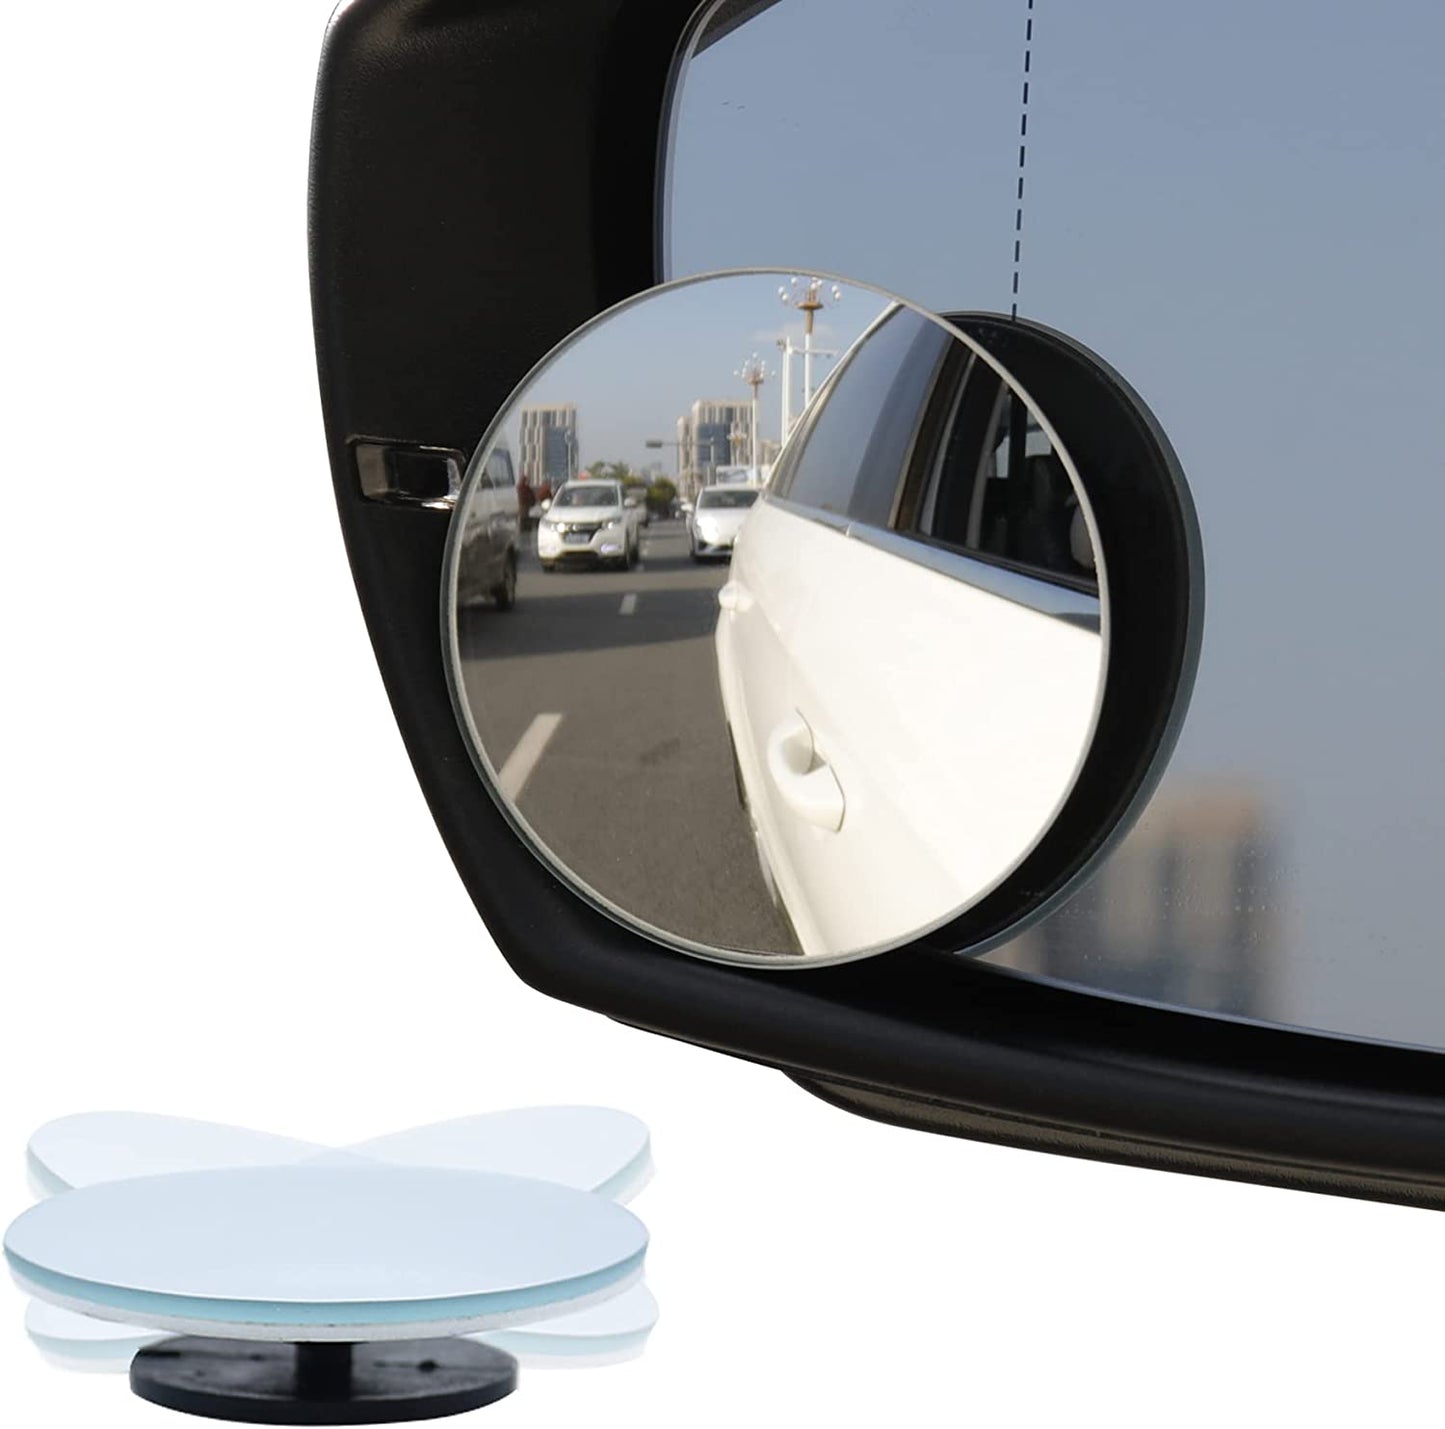 LivTee Blind Spot Mirror, 2" Round HD Glass Frameless Convex Rear View Mirrors Exterior Accessories with Wide Angle Adjustable Stick for Car SUV and Trucks, Pack of 2